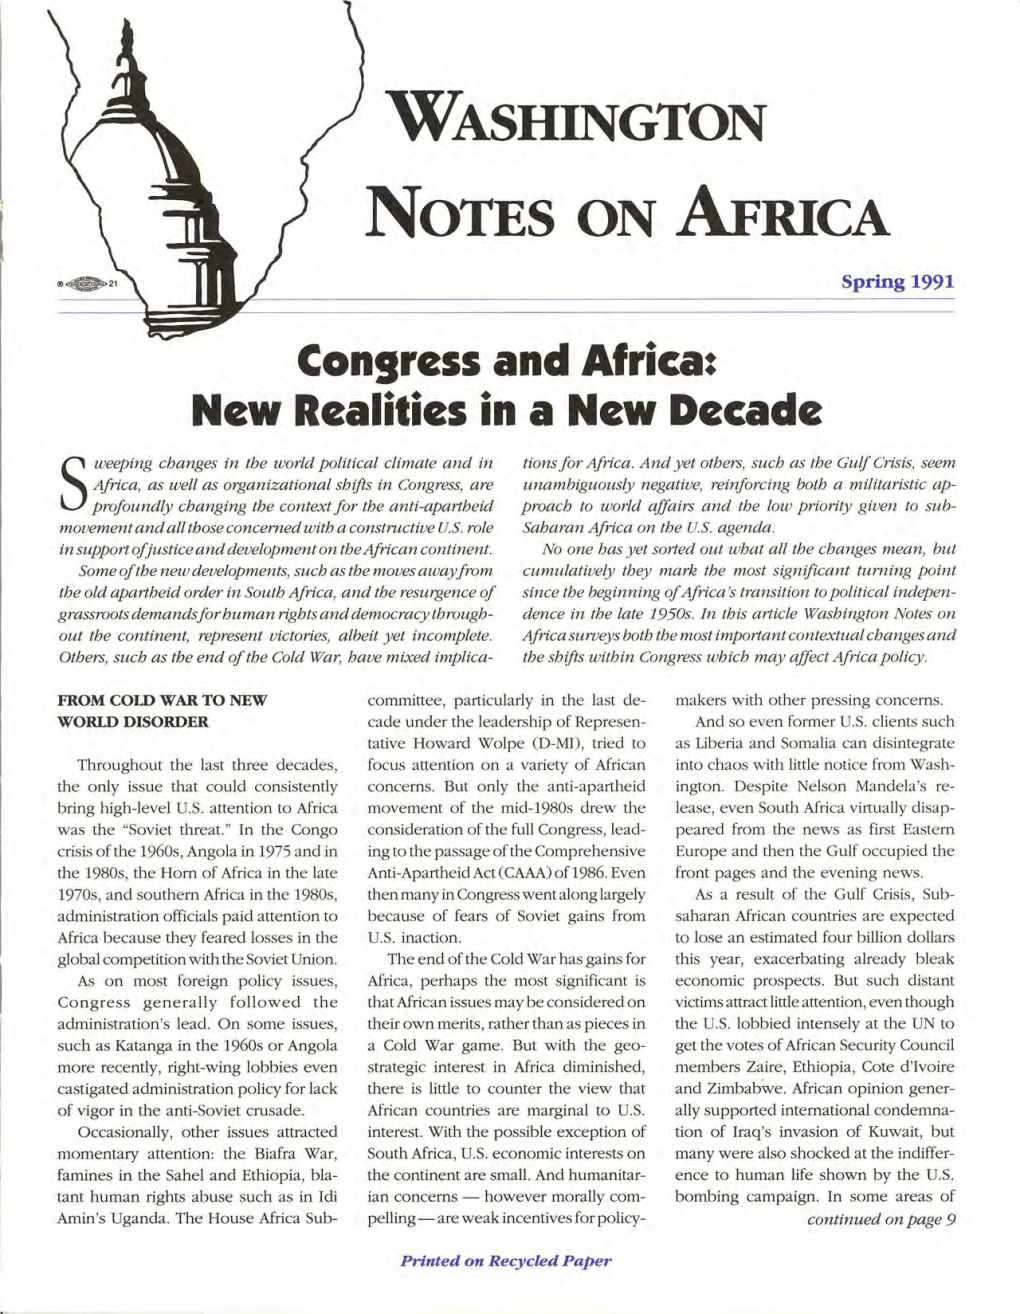 Congress and Africa: New Realities in a New Decade